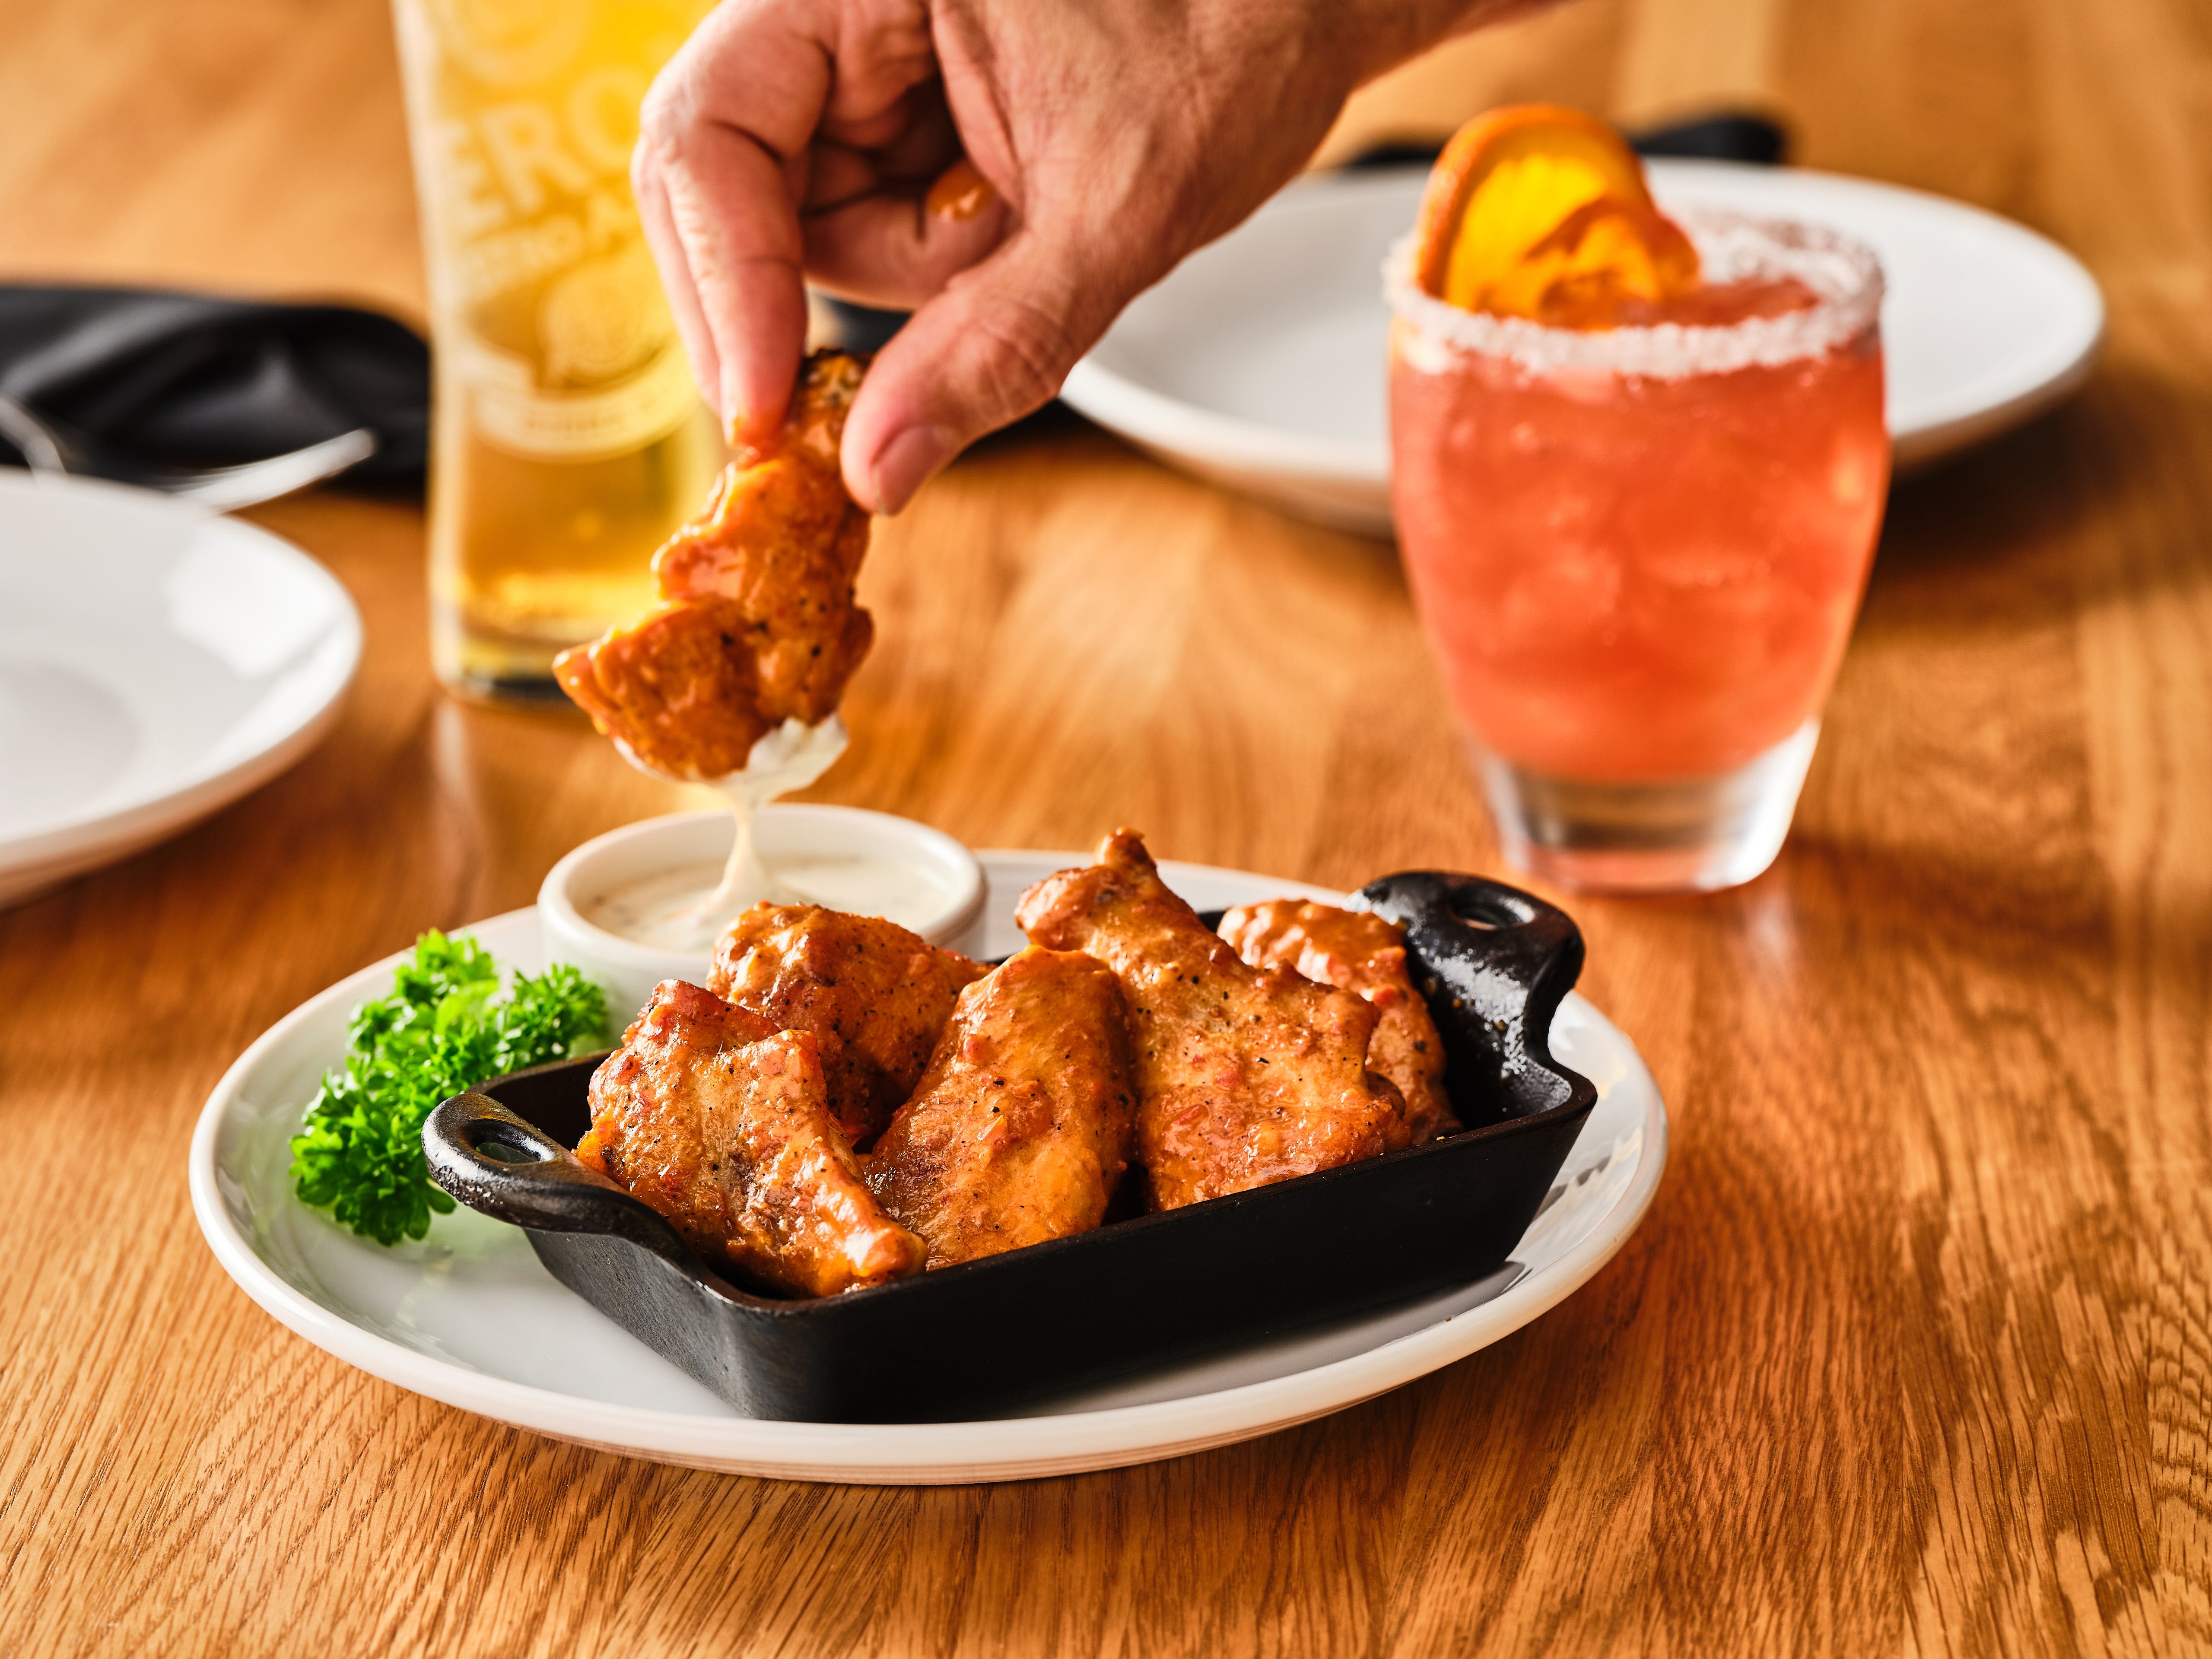 Best restaurants for great chicken wings + dining deals in Palm Beach County